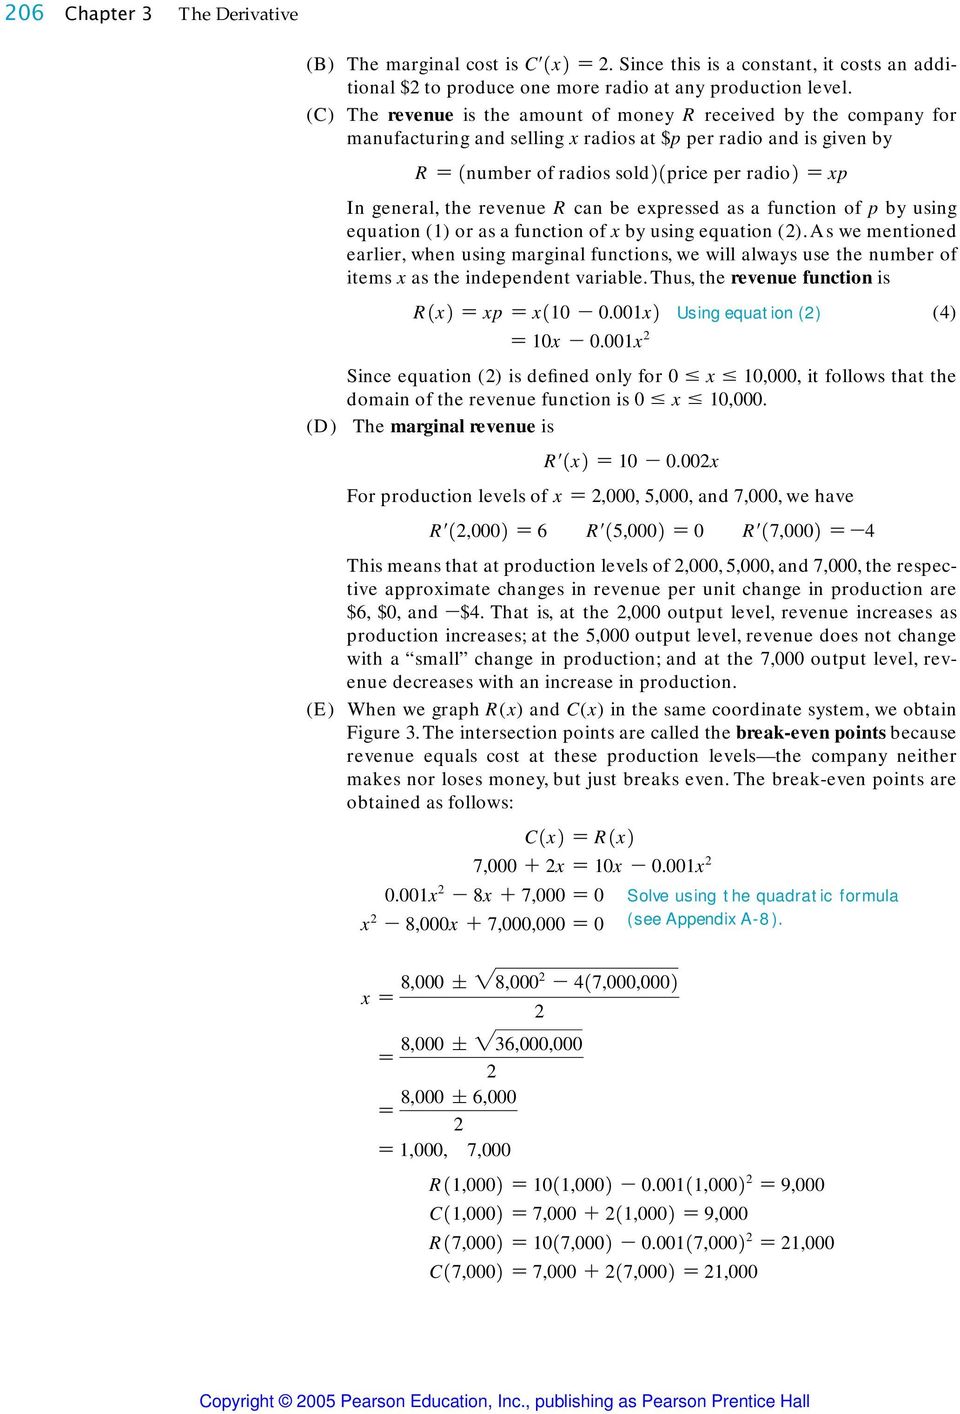 revenue R can be epressed as a function of p by using equation (1) or as a function of by using equation (2).